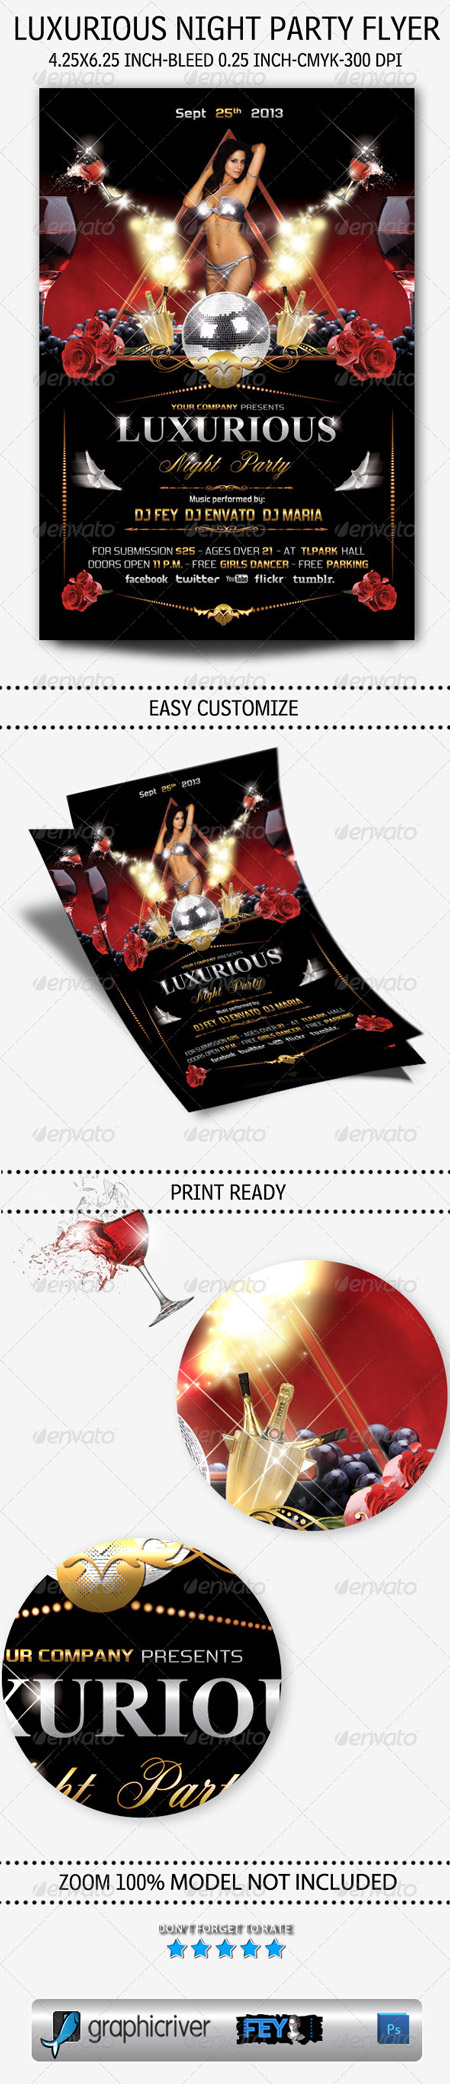 PSD - Luxurious Night Party Flyer